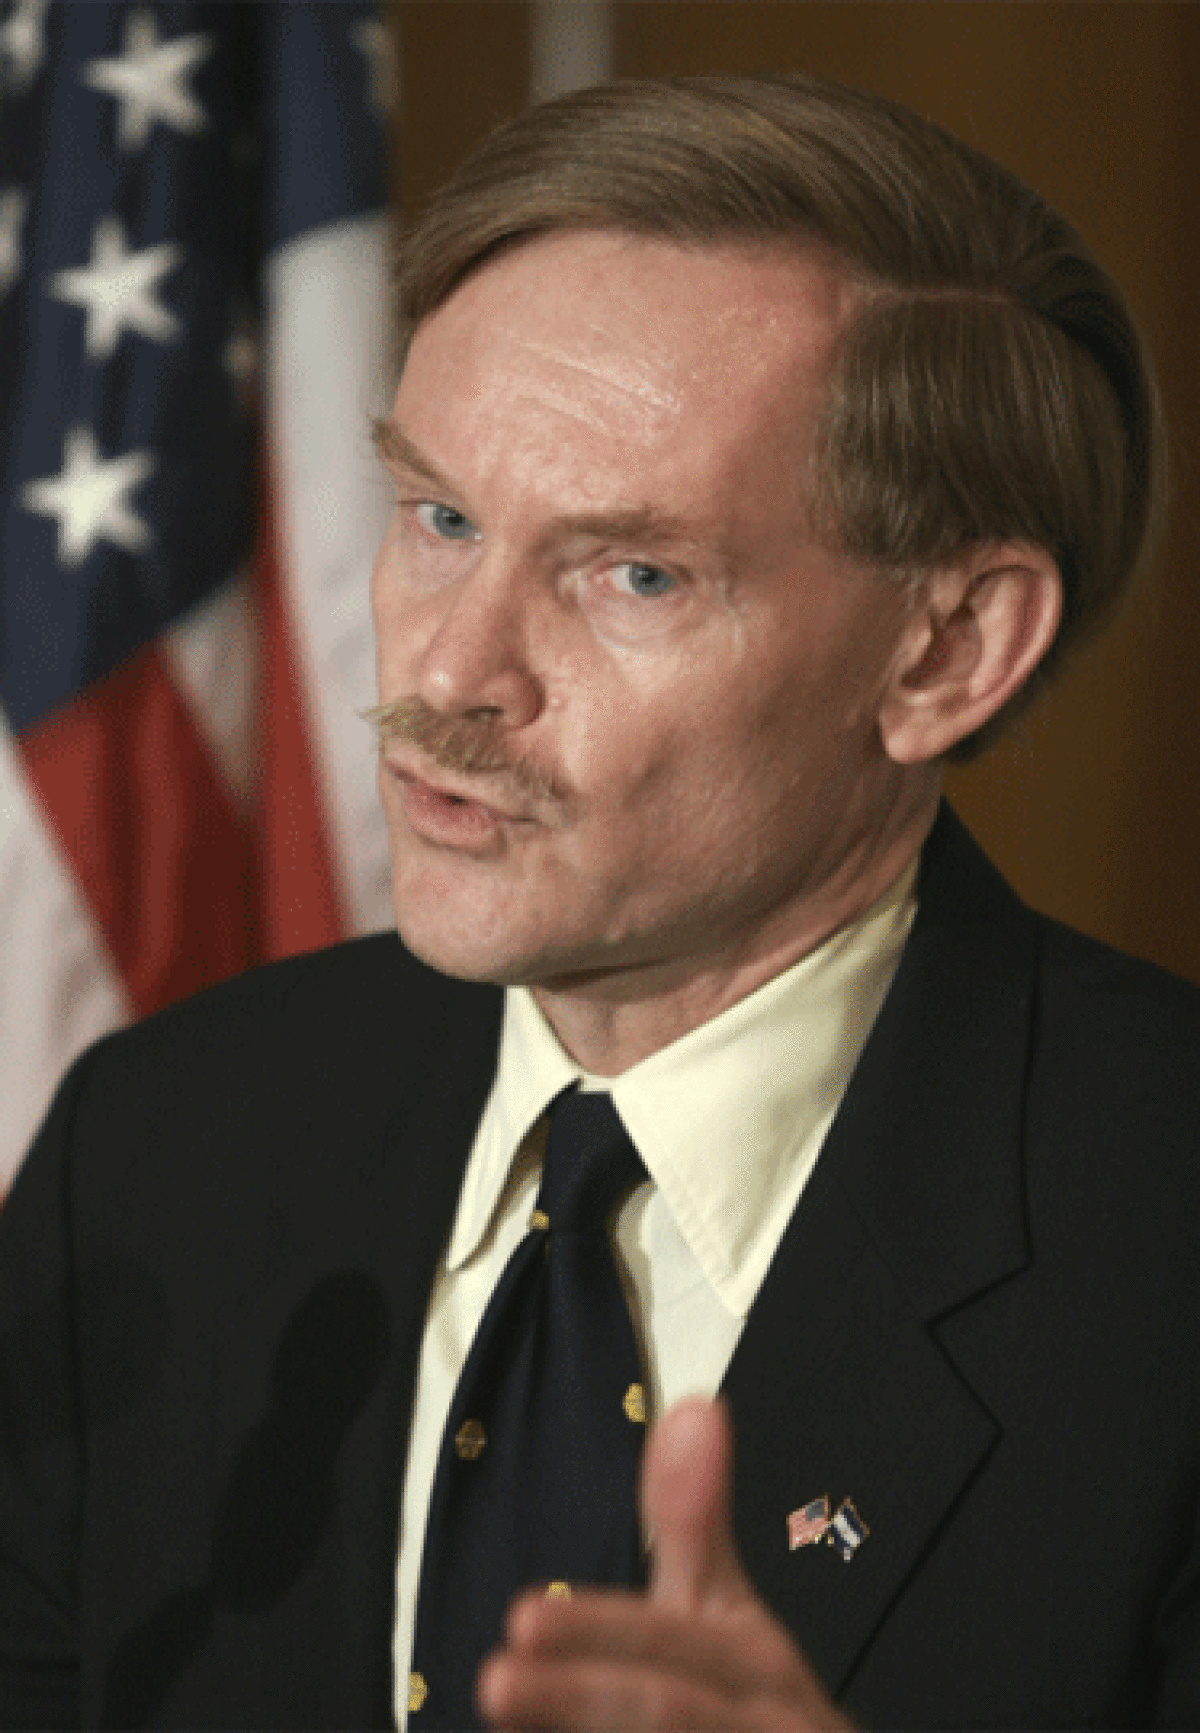 Former Bush administration official Robert Zoellick recently withdrew as a commencement speaker at Swarthmore College.